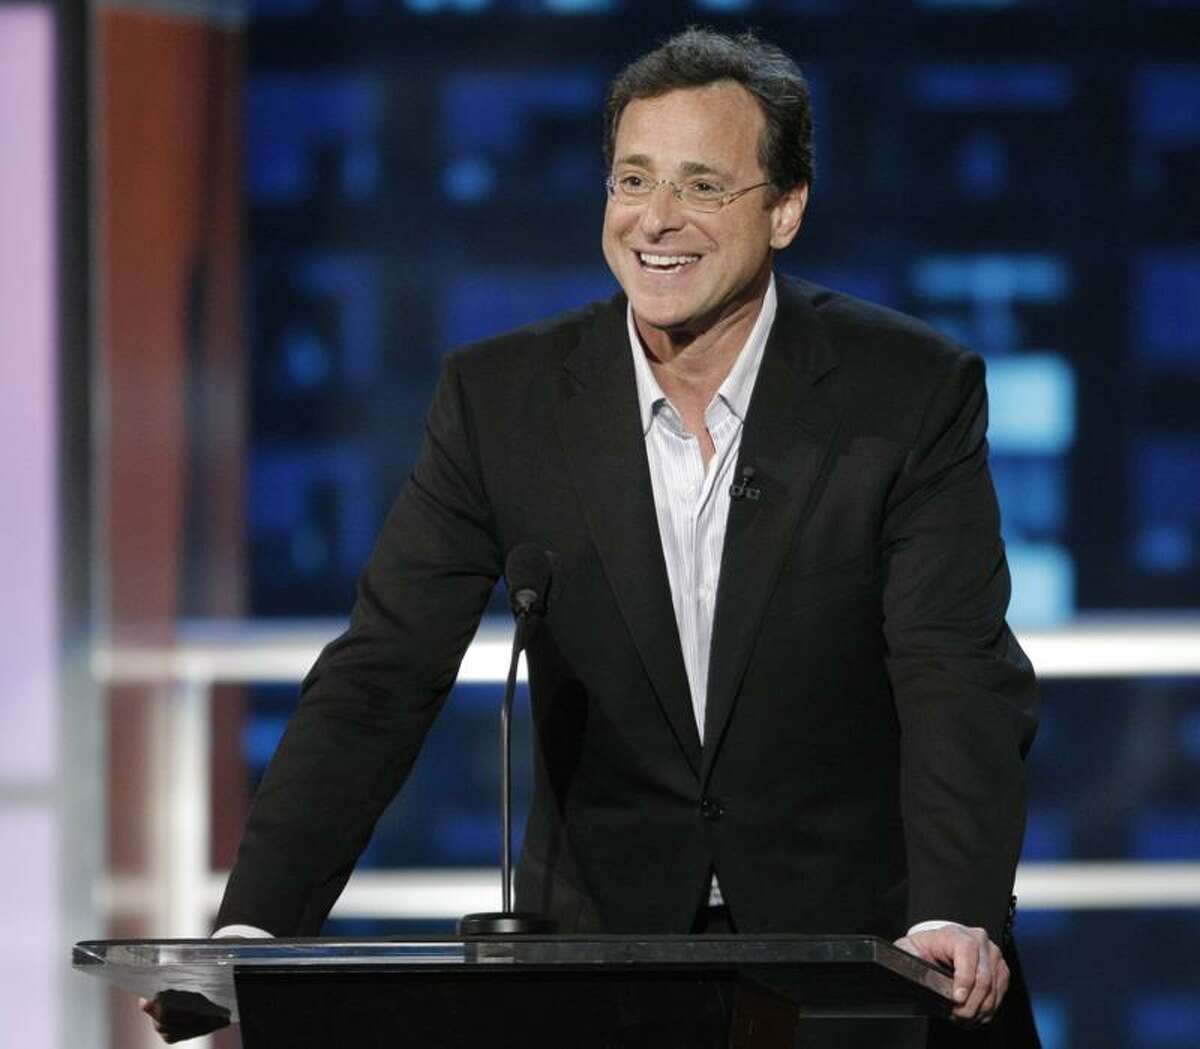 Bob Saget, a comedian and actor known for his role as a widower raising a trio of daughters in the sitcom "Full House," died in Florida on Sunday, Jan. 9, 2022. He was 65 (Pictured: Aug. 3, 2008.)